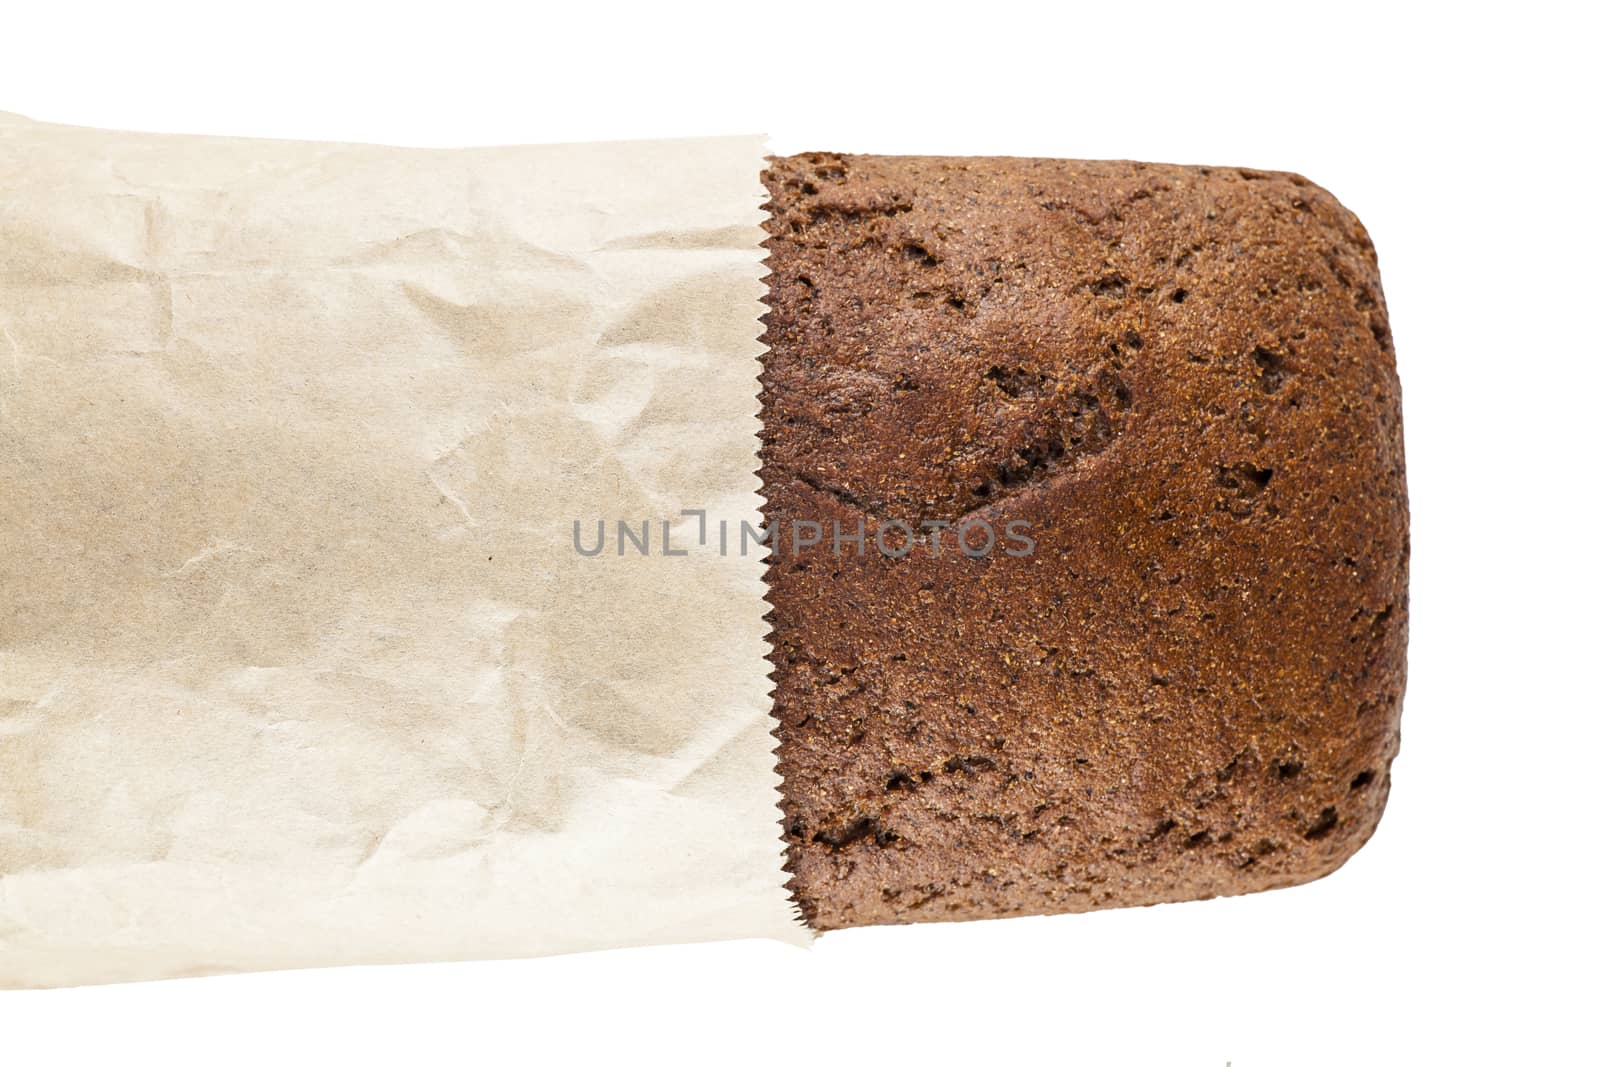 rye bread in paper packing isolated on a white background